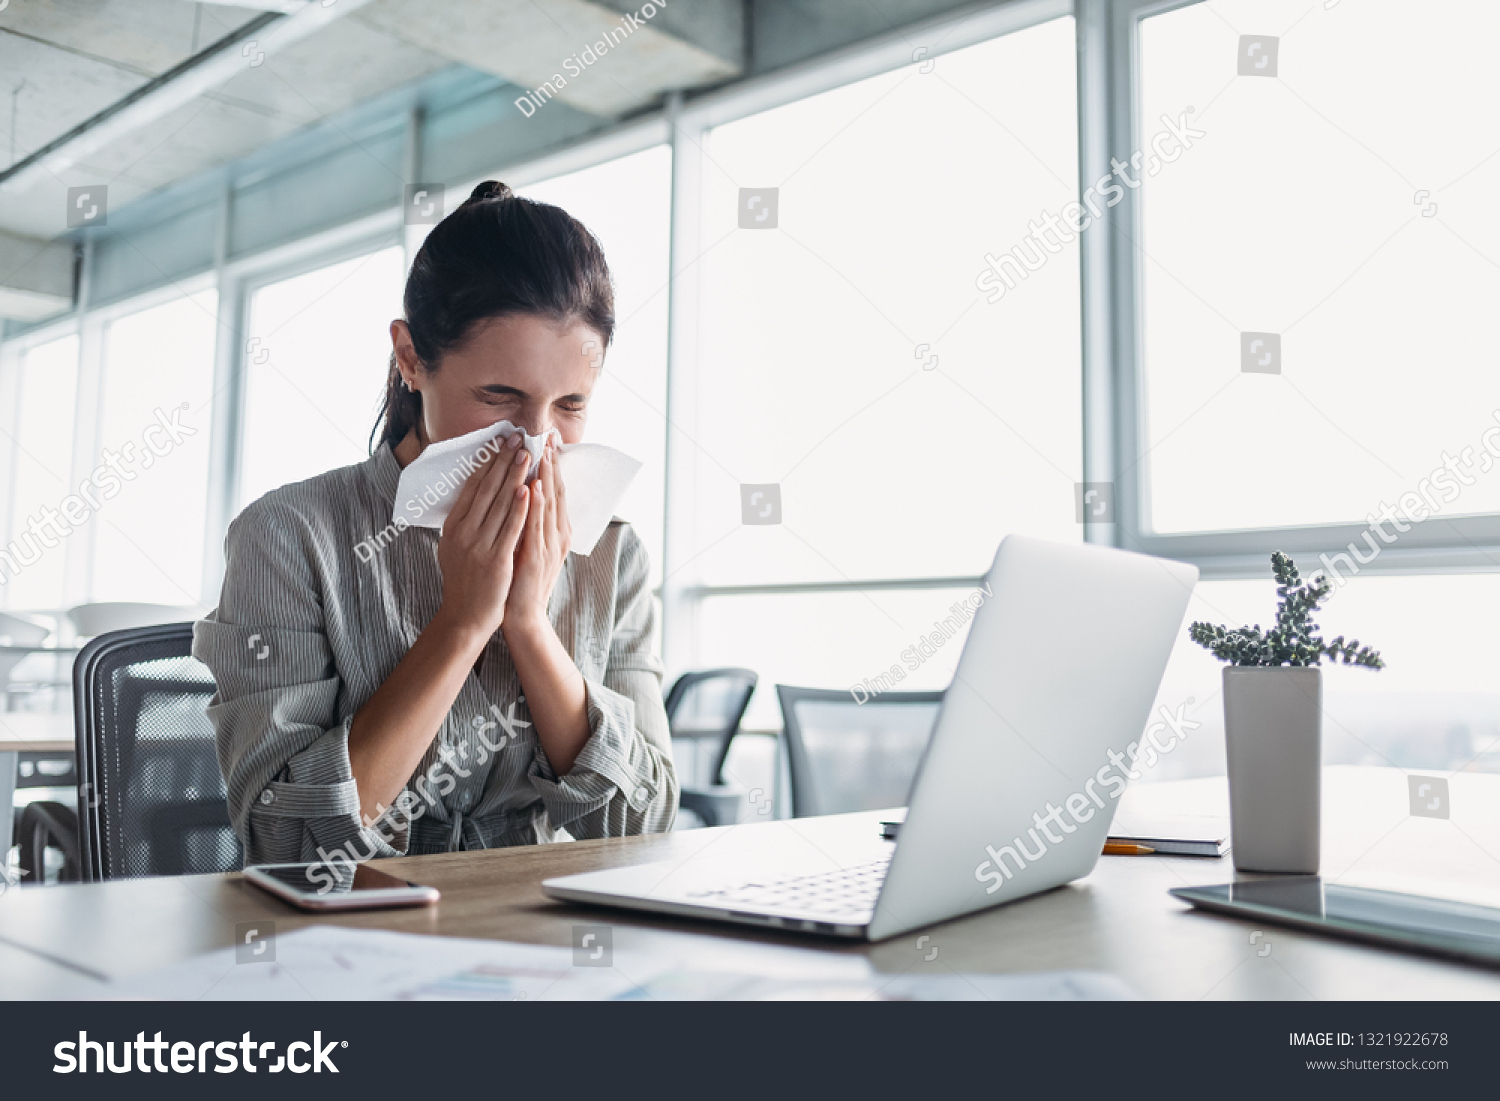 Sick and overworked businesswoman sitting at the desk in the office and blowing her nose, feeling unwell. #1321922678